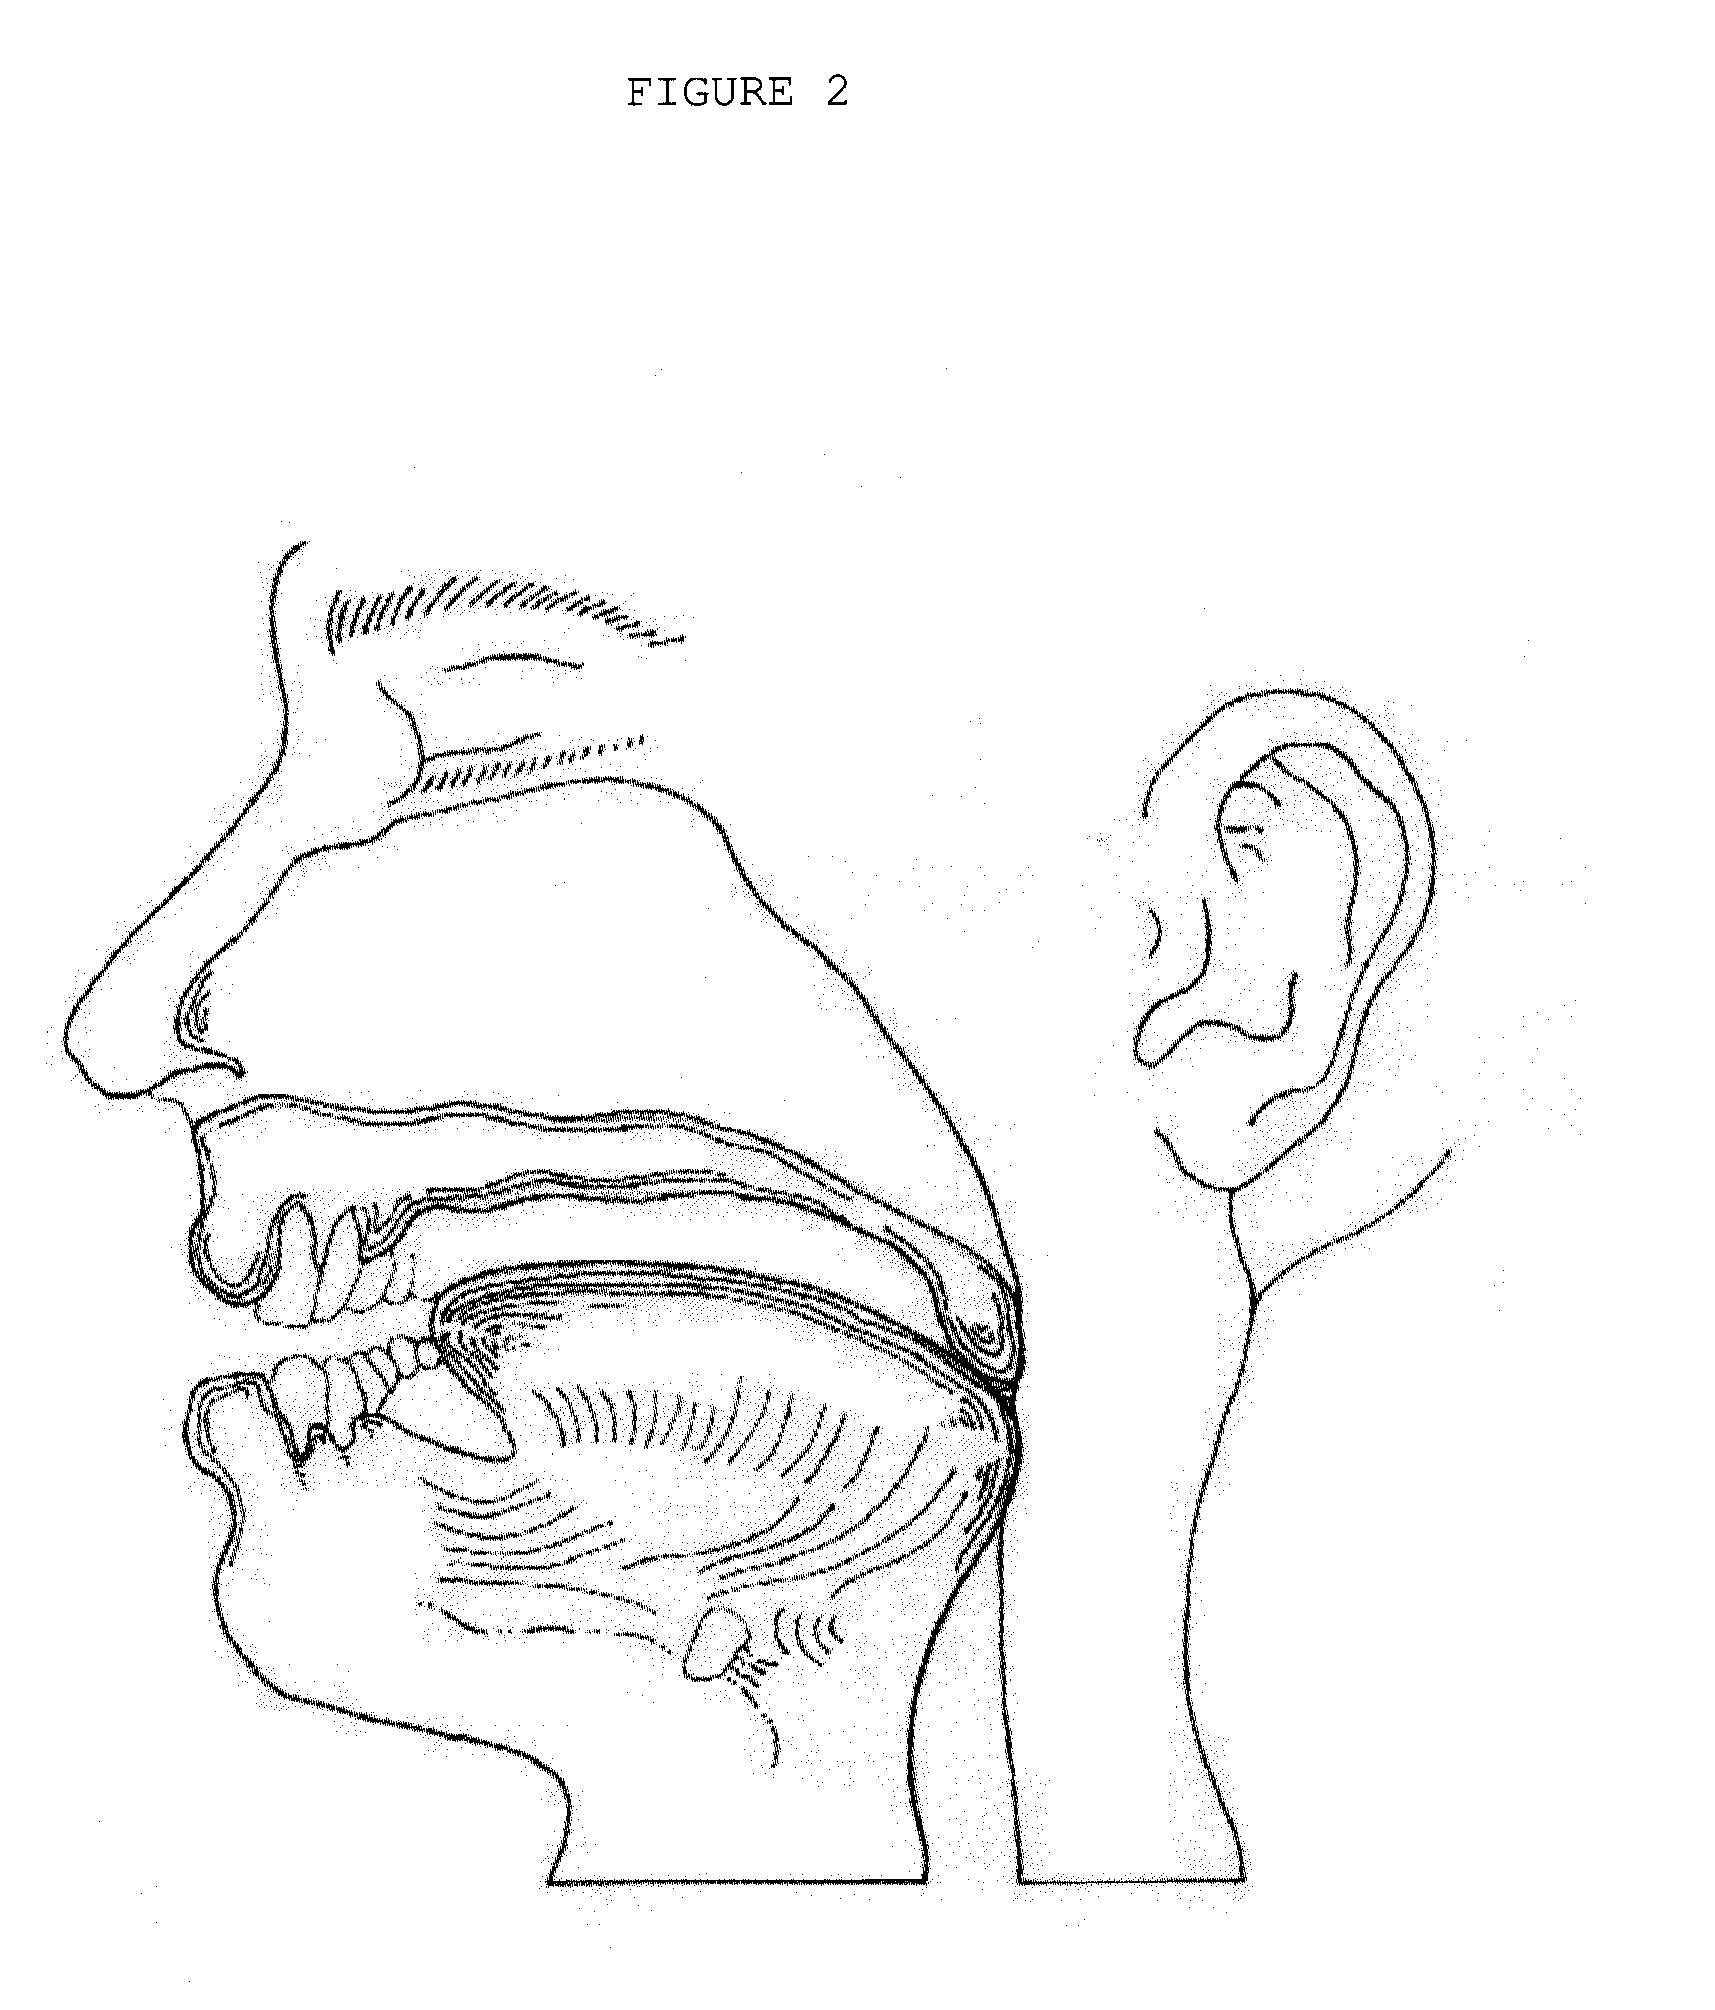 Integrated oral appliance for sleep-disordered breathing